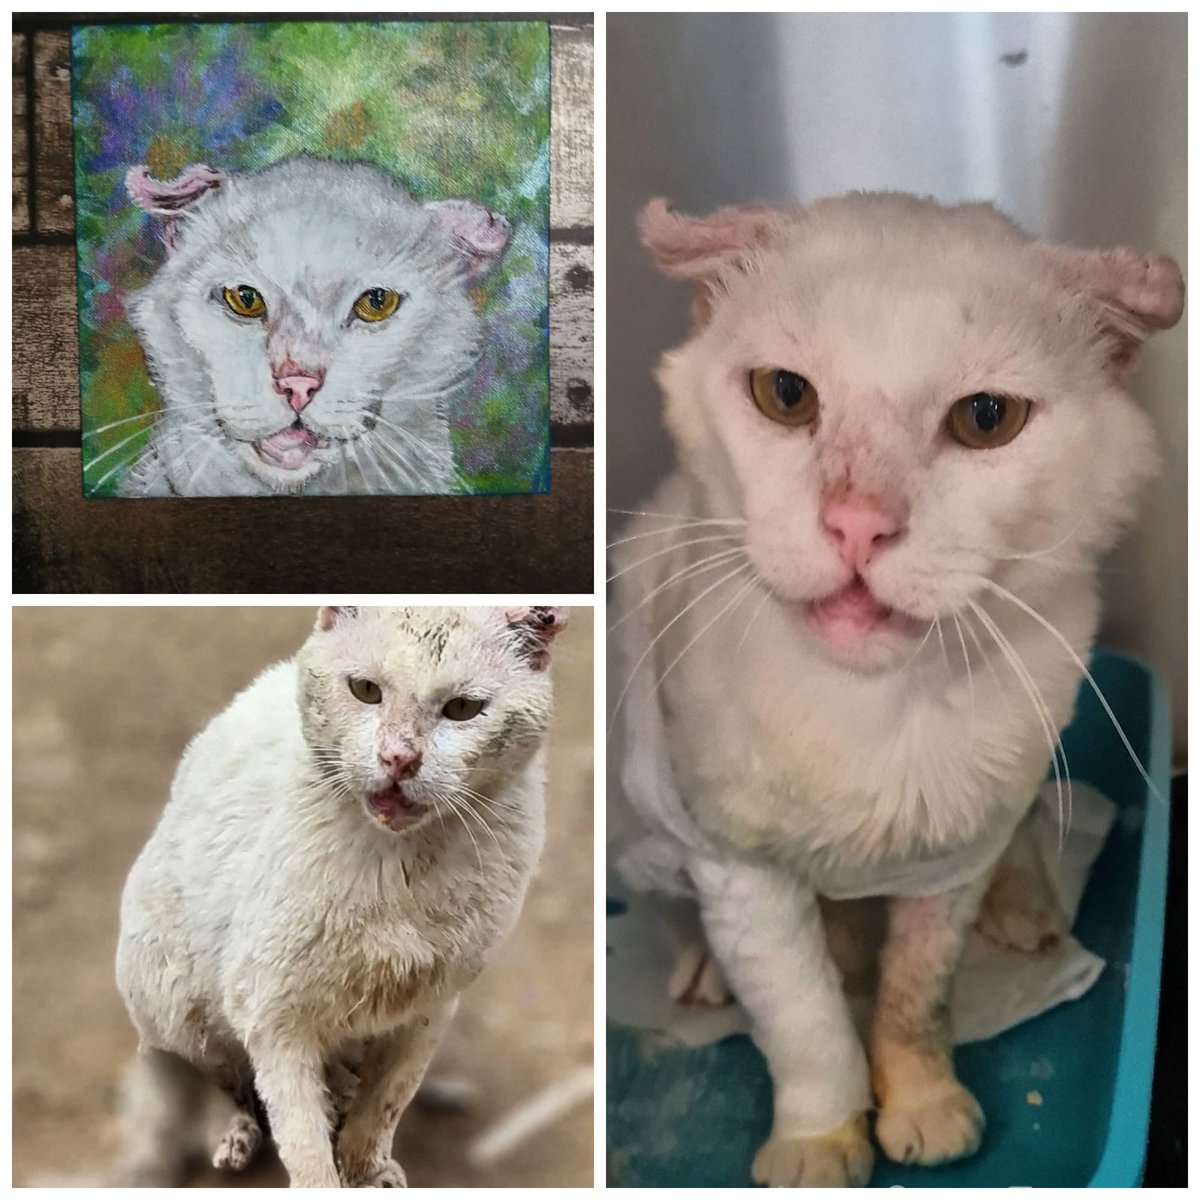 A Painting for Samson 🐾😻 to support @catswithnohope 🙏🐾
#catart #help #supportforsamson #rescuecat #Finnslawpart2 #cats #rescue #catlover #home with mounting vet bills we need to get him well and home ❤️🏡🐾